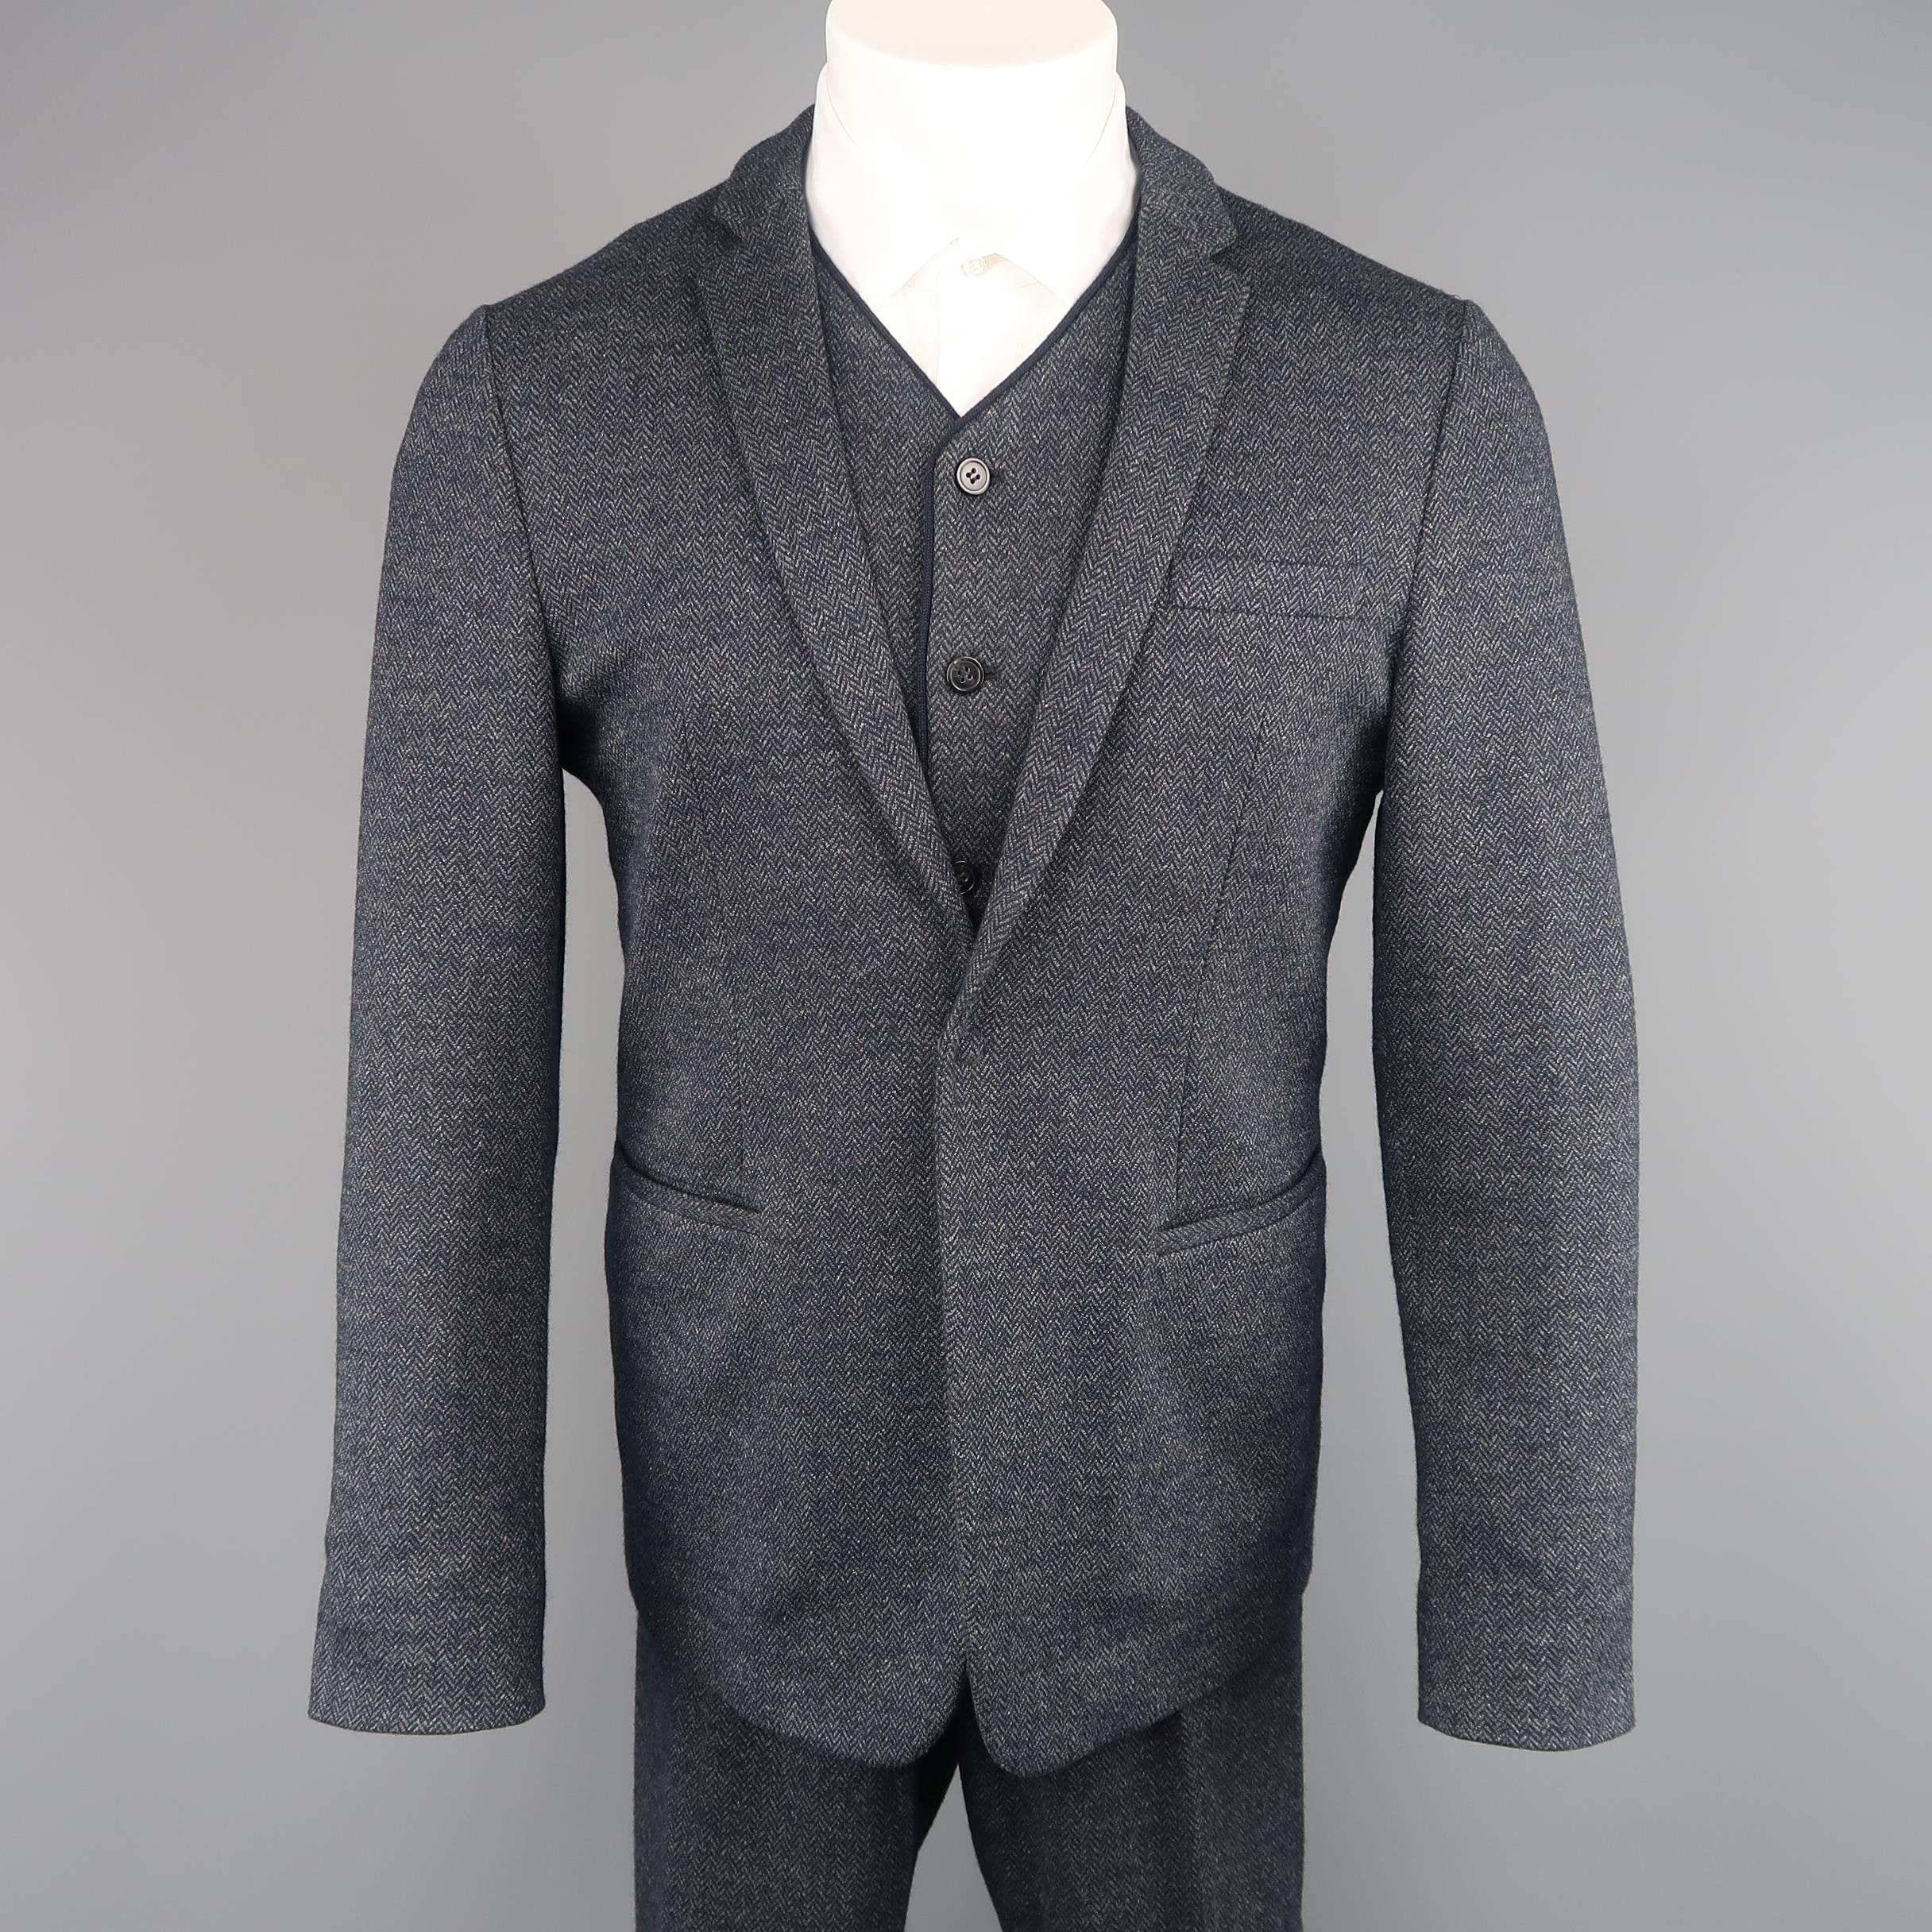 Three piece EMPORIO ARMANI suit comes in a navy blue Herringbone print wool cotton knit felt and includes a singe breasted, notch lapel sport coat with single hidden snap closure, V neck vest, and matching flat front trousers. Made in Italy.
 
Good